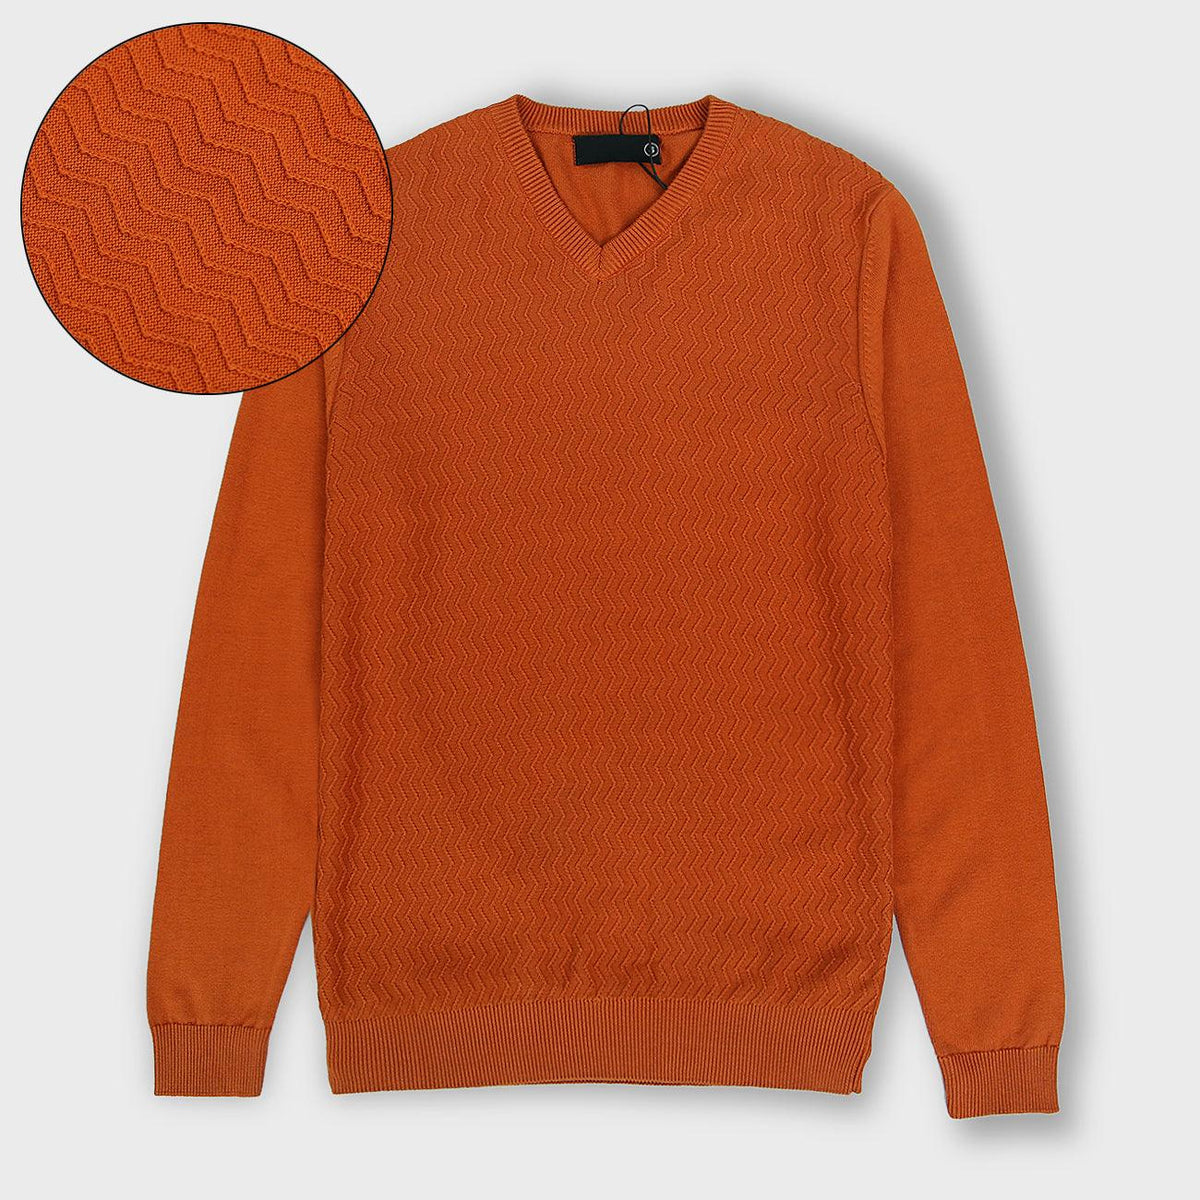 Mens Orange Premium Quality Waves Knitted Wool Sweater (GL-10323) - Brands River